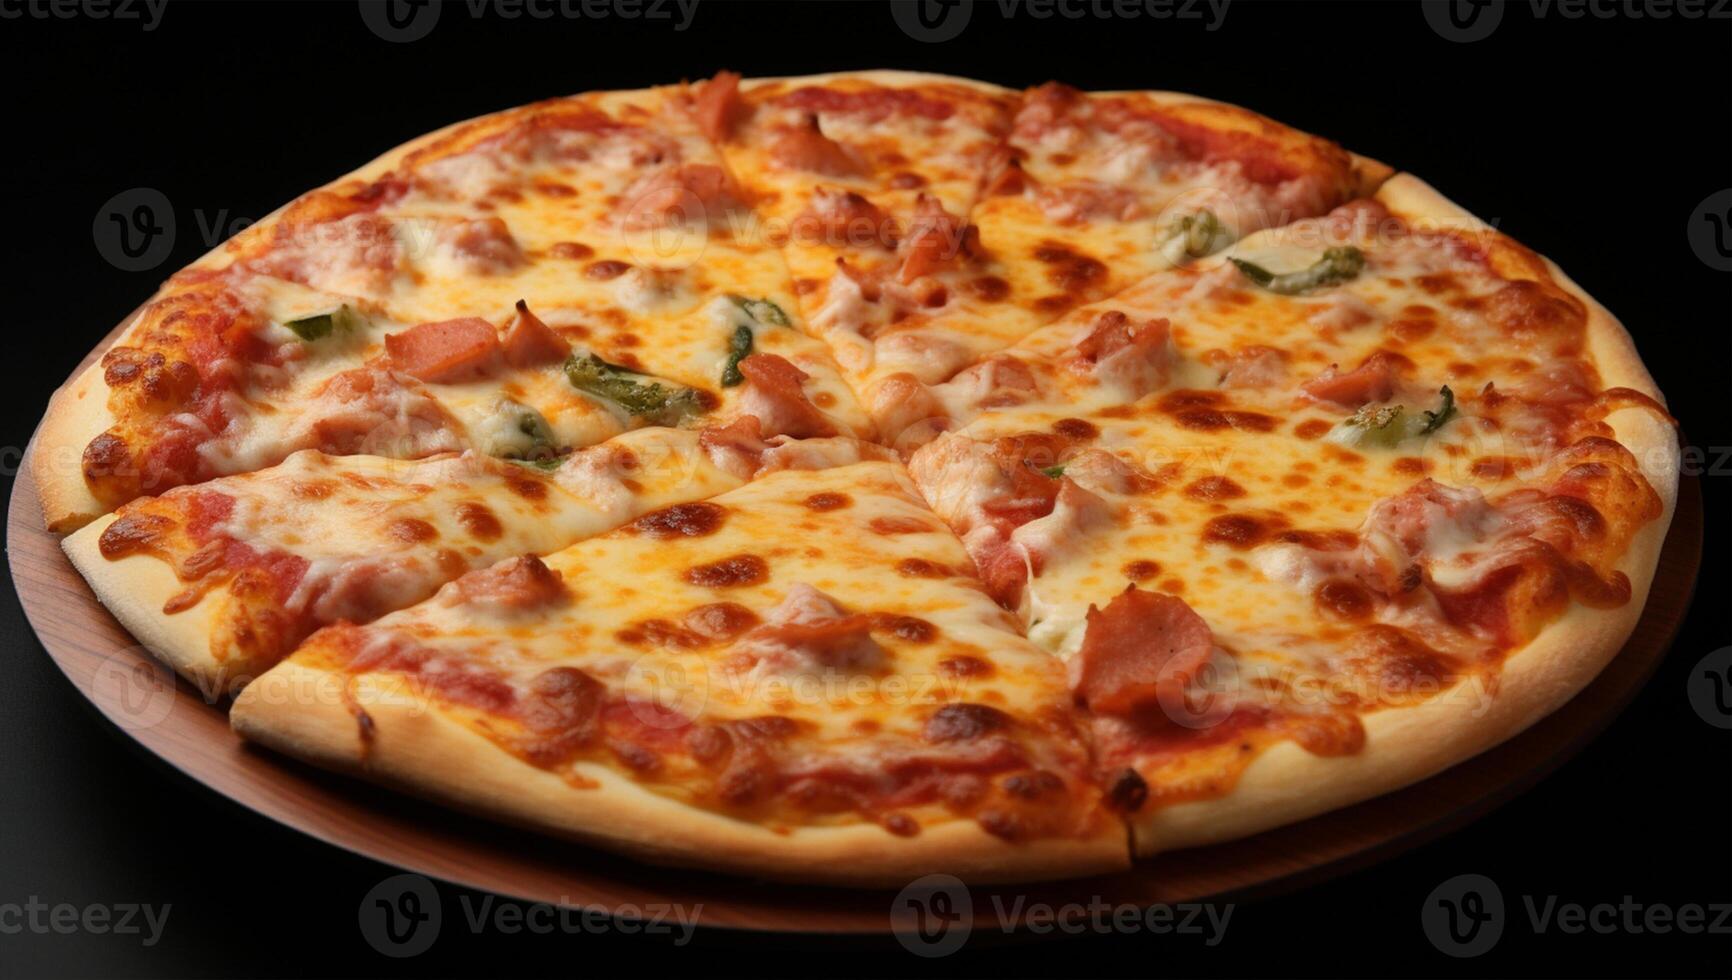 A pizza with pepperoni on it, photo